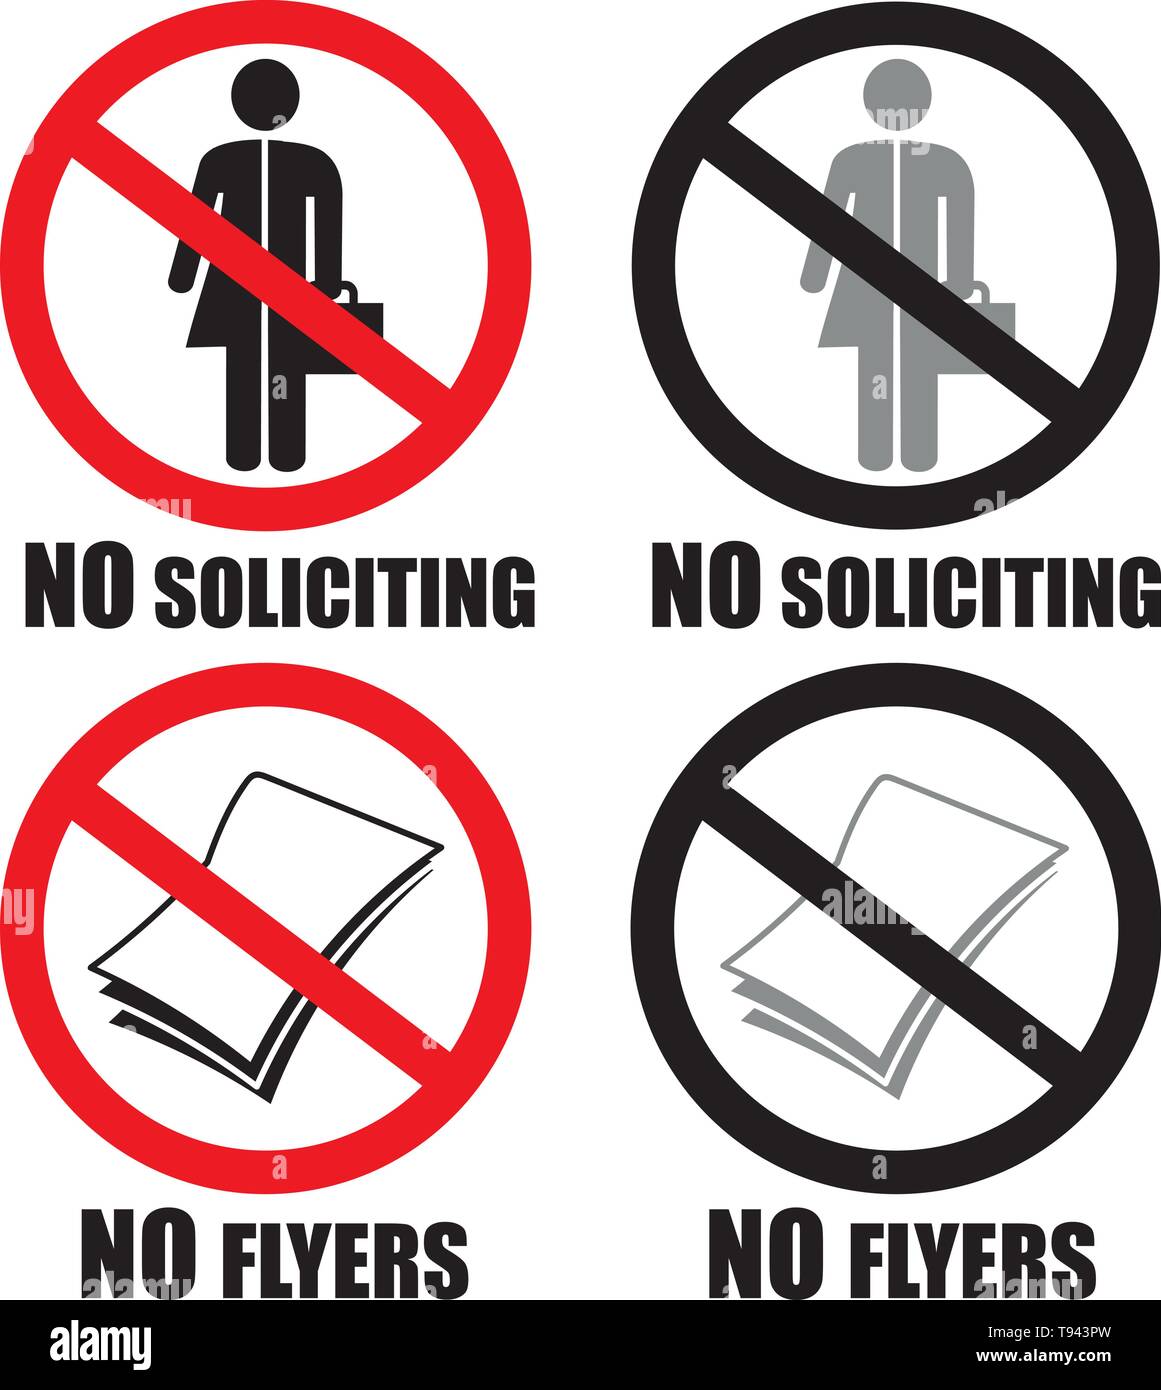 no-soliciting-unisex-and-no-flyers-allowed-at-home-symbol-sign-vector